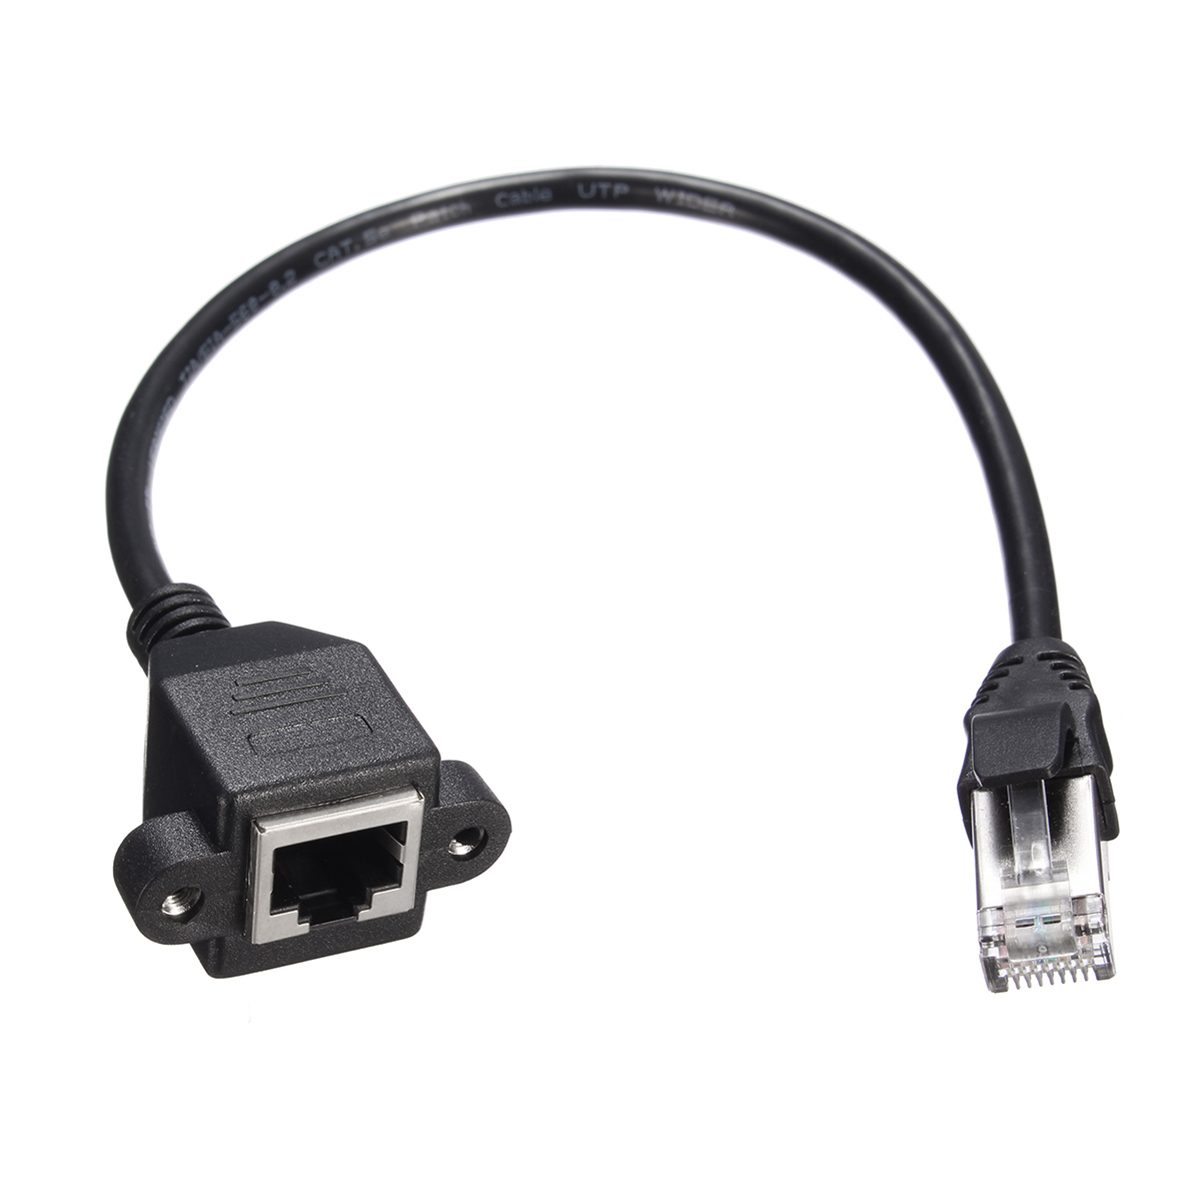 30cm/1M RJ45 Cable Male to Female Screw Panel Mount Ethernet LAN Network Extension Cable 92